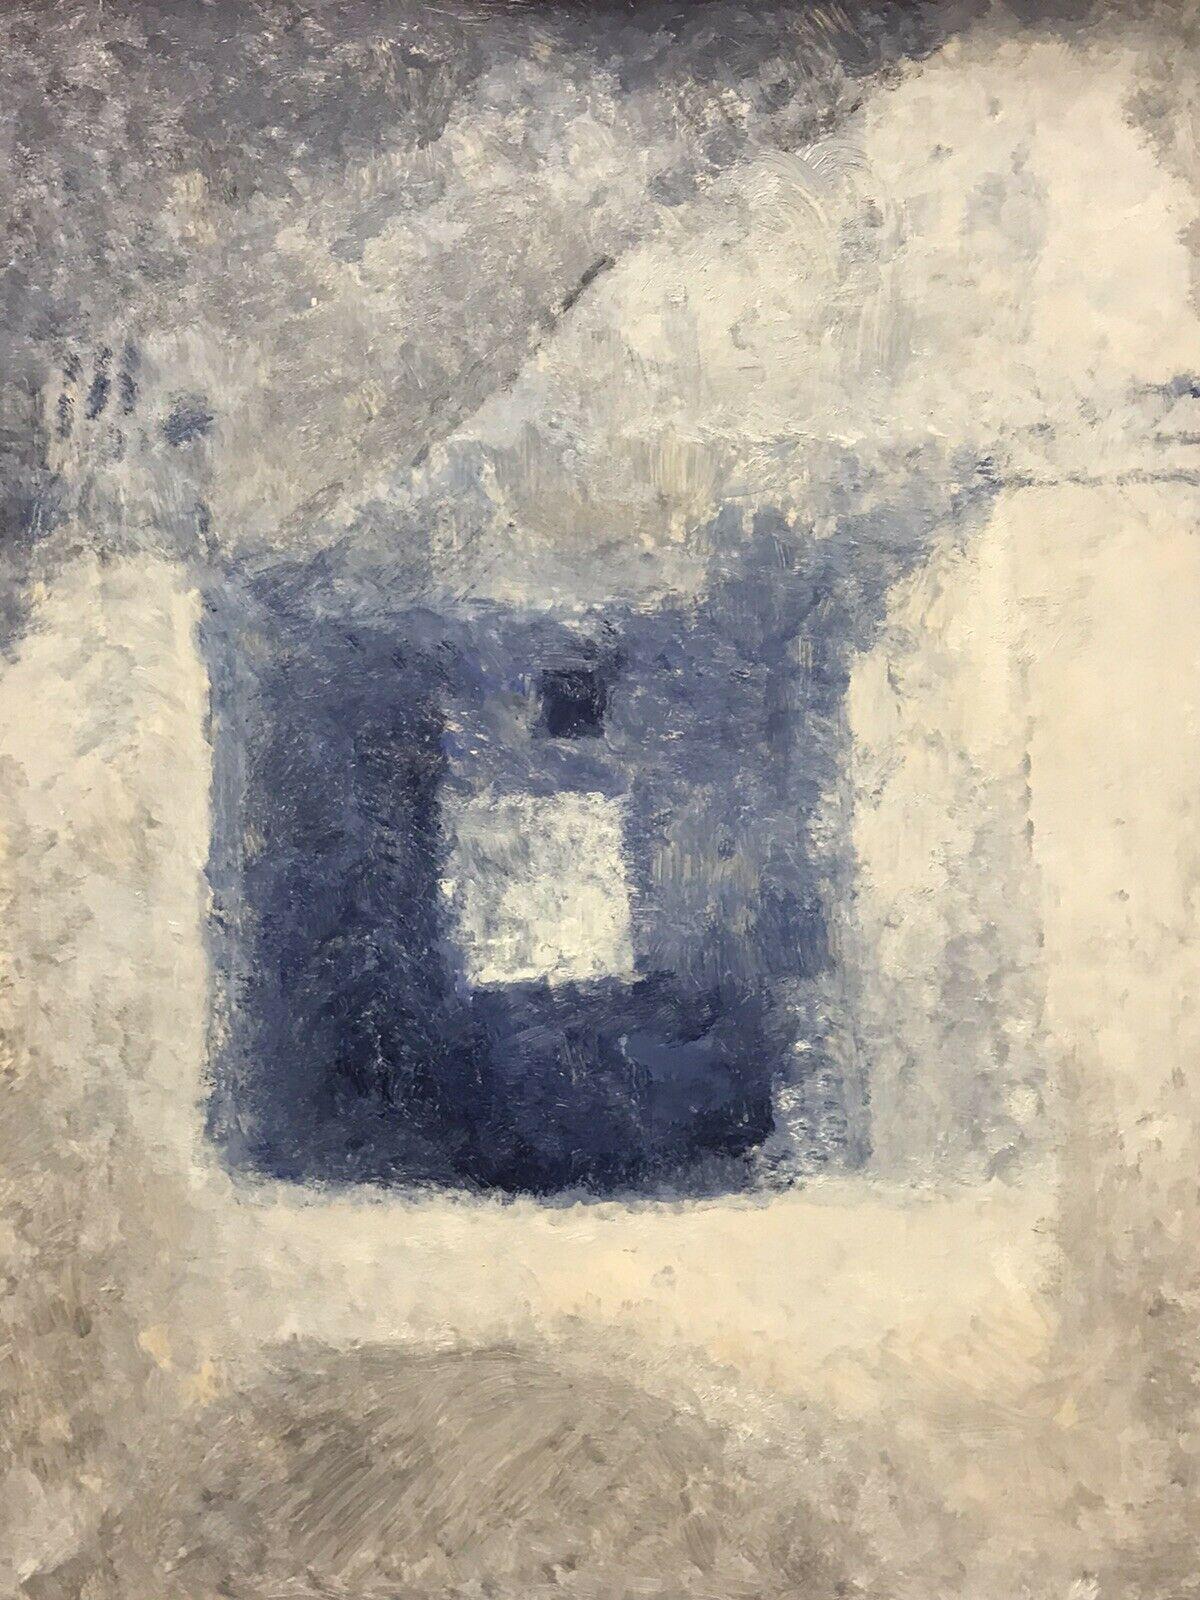 Yvette Dubois Habasque Abstract Painting - 20TH CENTURY FRENCH CUBIST ABSTRACT PAINTING - BLUE GREY AND WHITE COLORS